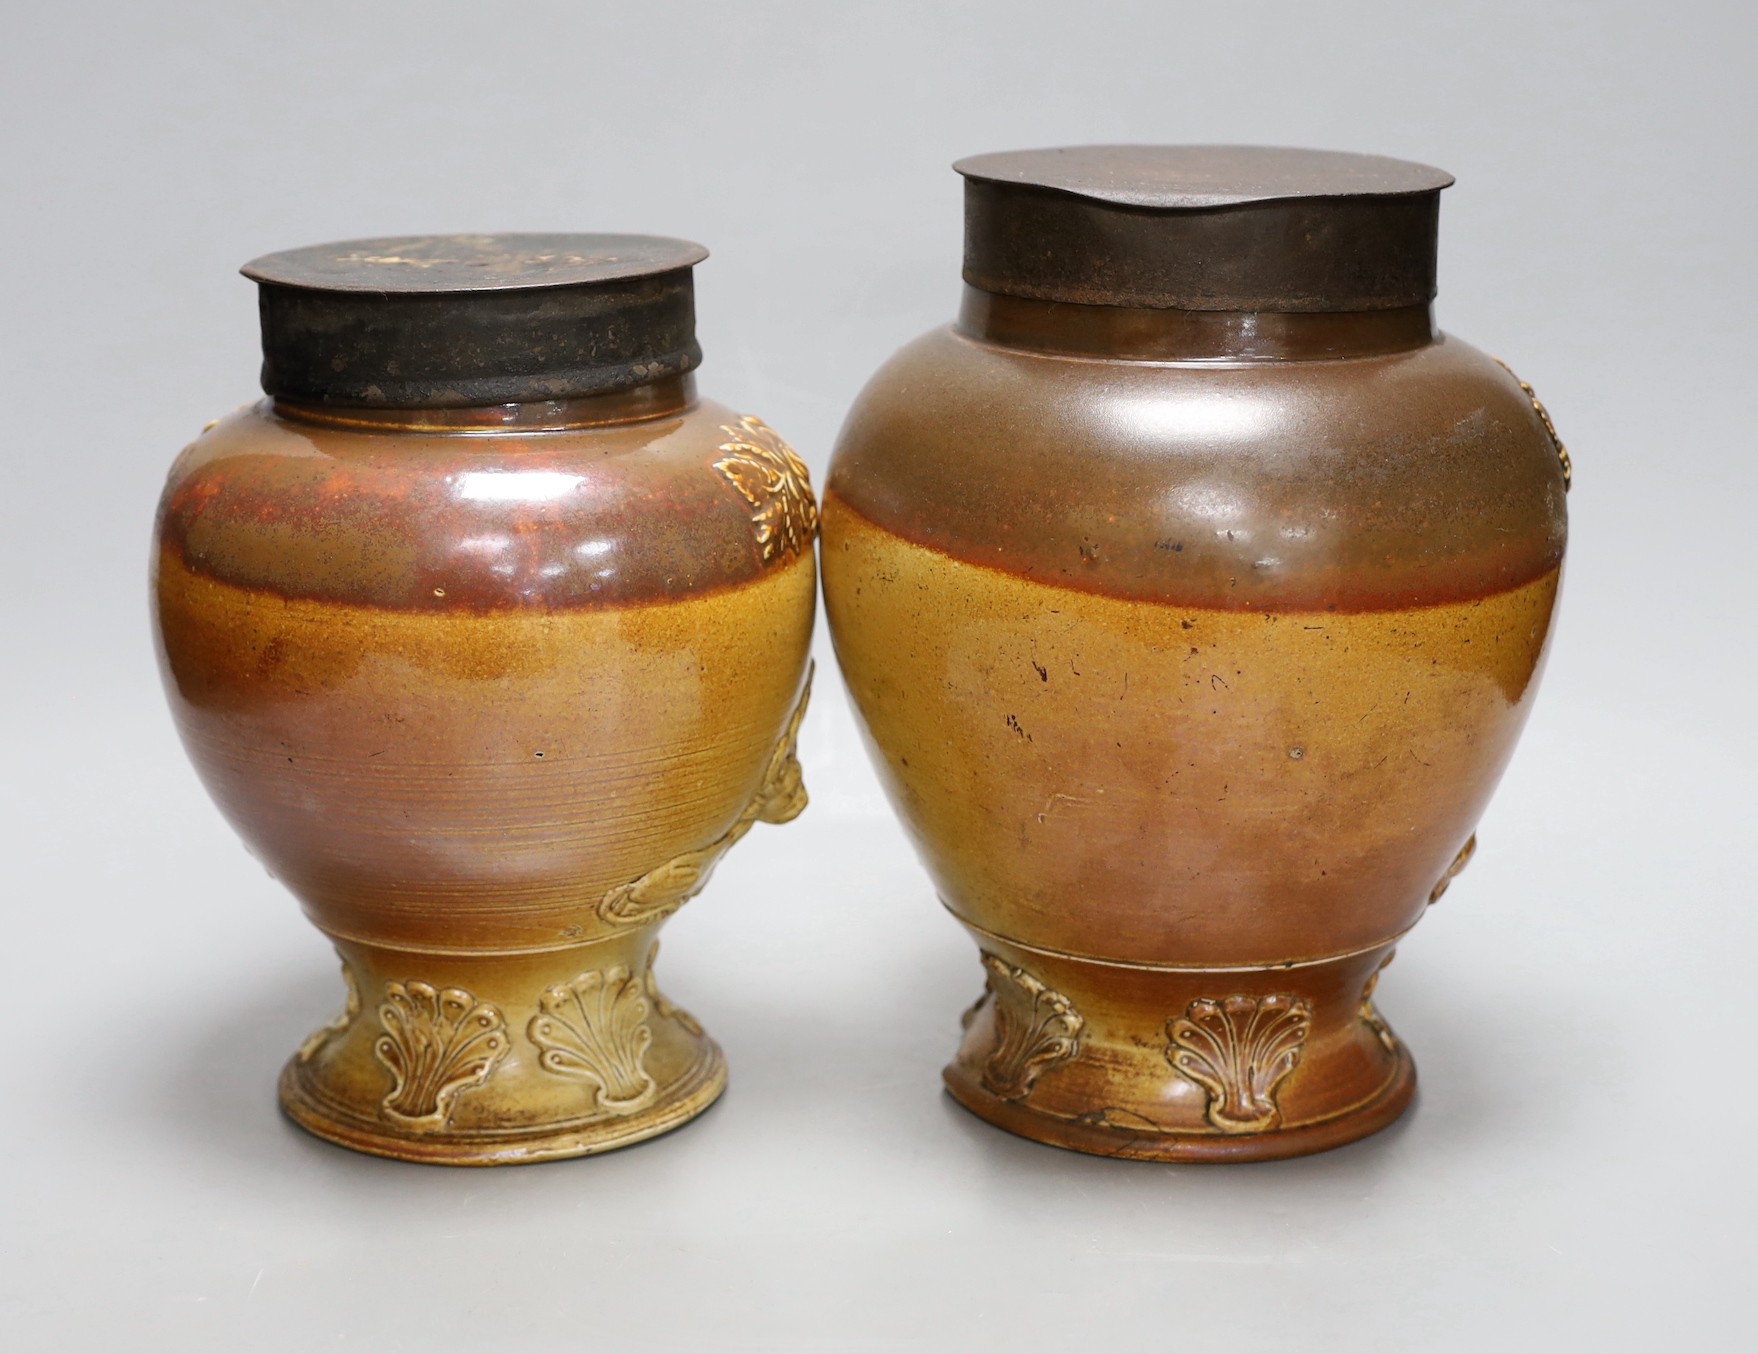 Two 19th century baluster shape salt glazed stoneware storage jars, each with Royal Coat of Arms sprigging, 24cm